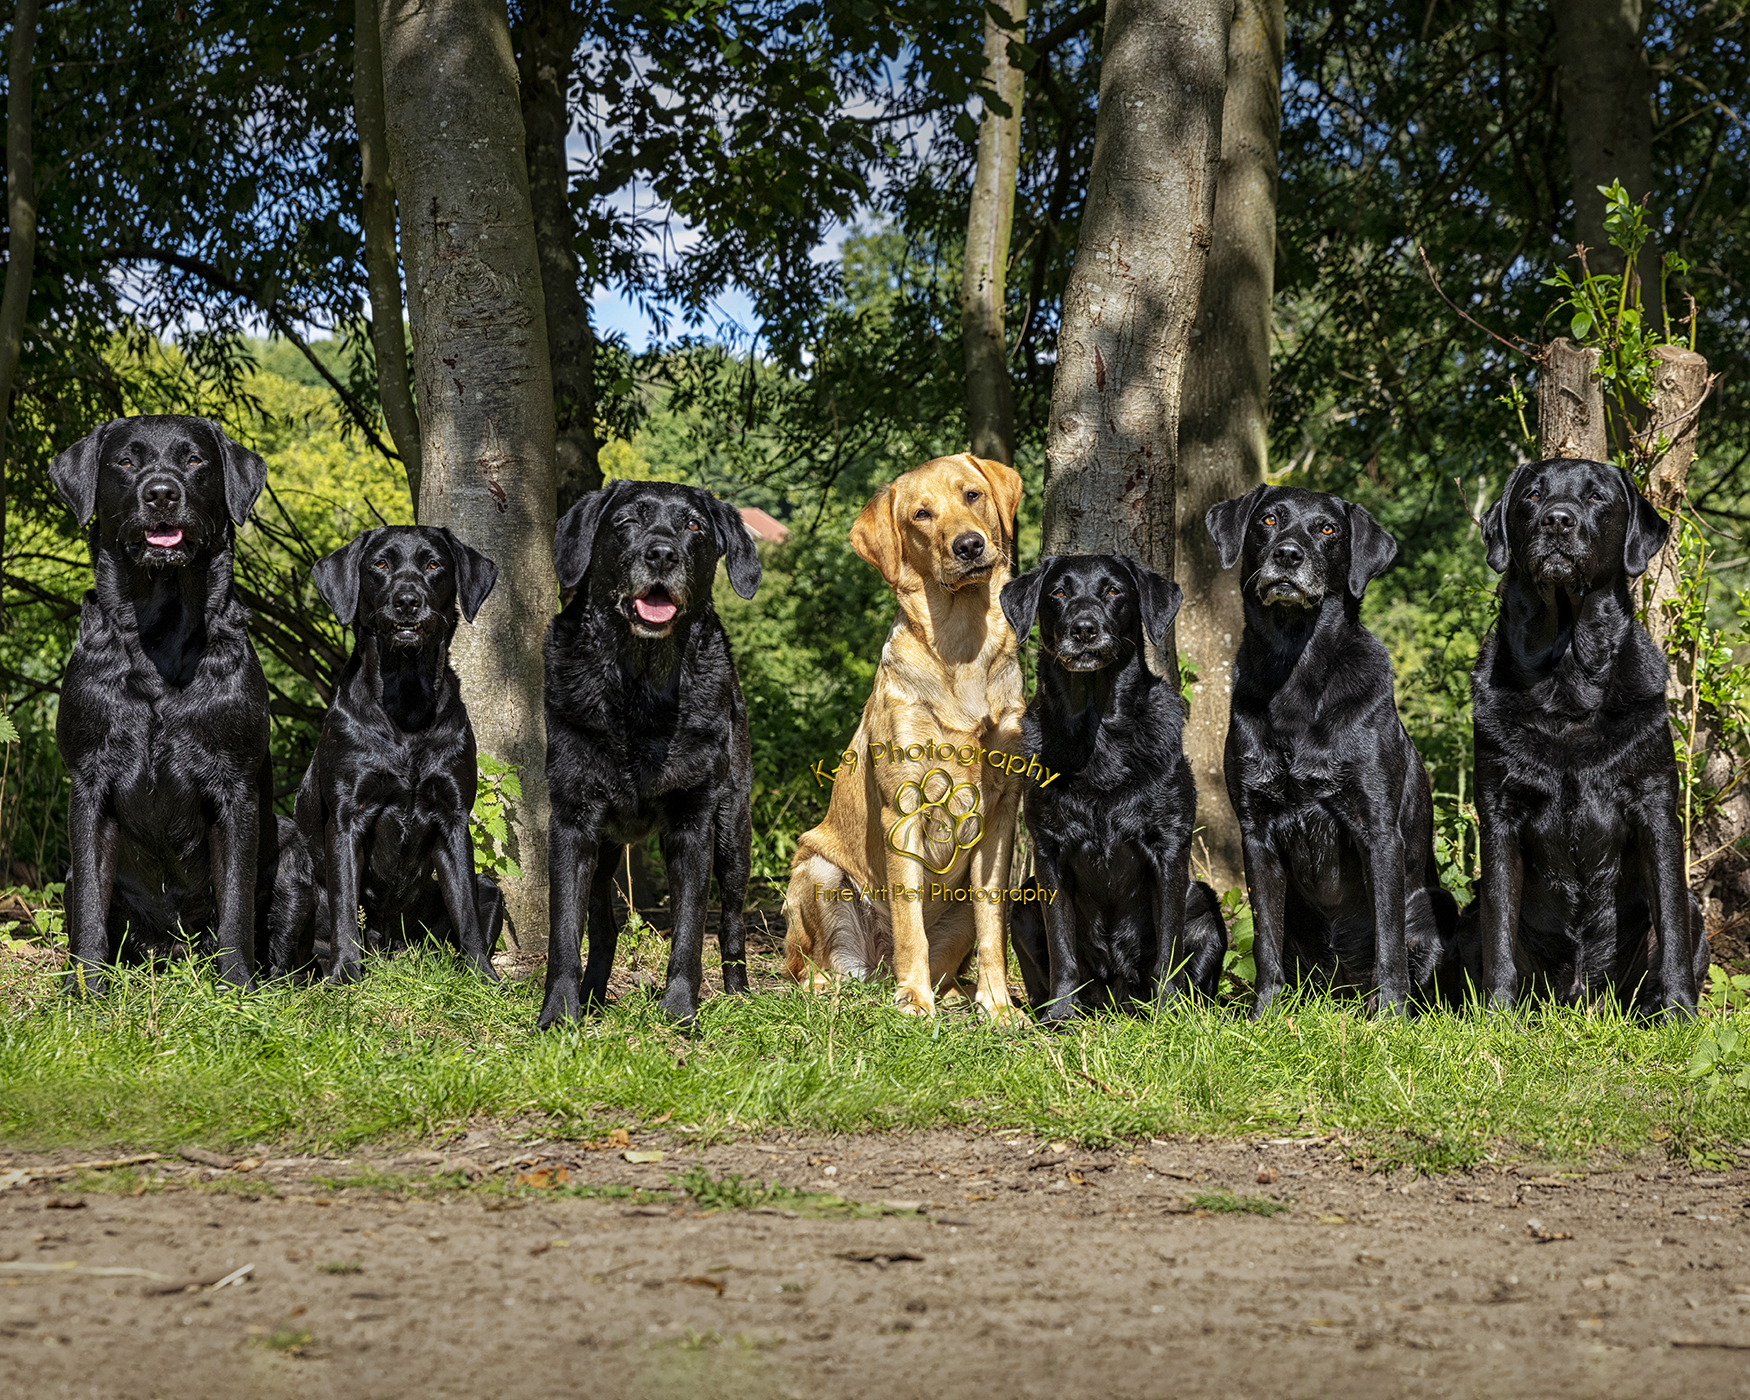 professional pet photography in Bedfordshire by Adrian Bullers | this beautiful black Labrador dog was photographed on location by award winning Pet photographer Adrian Bullers AMPA